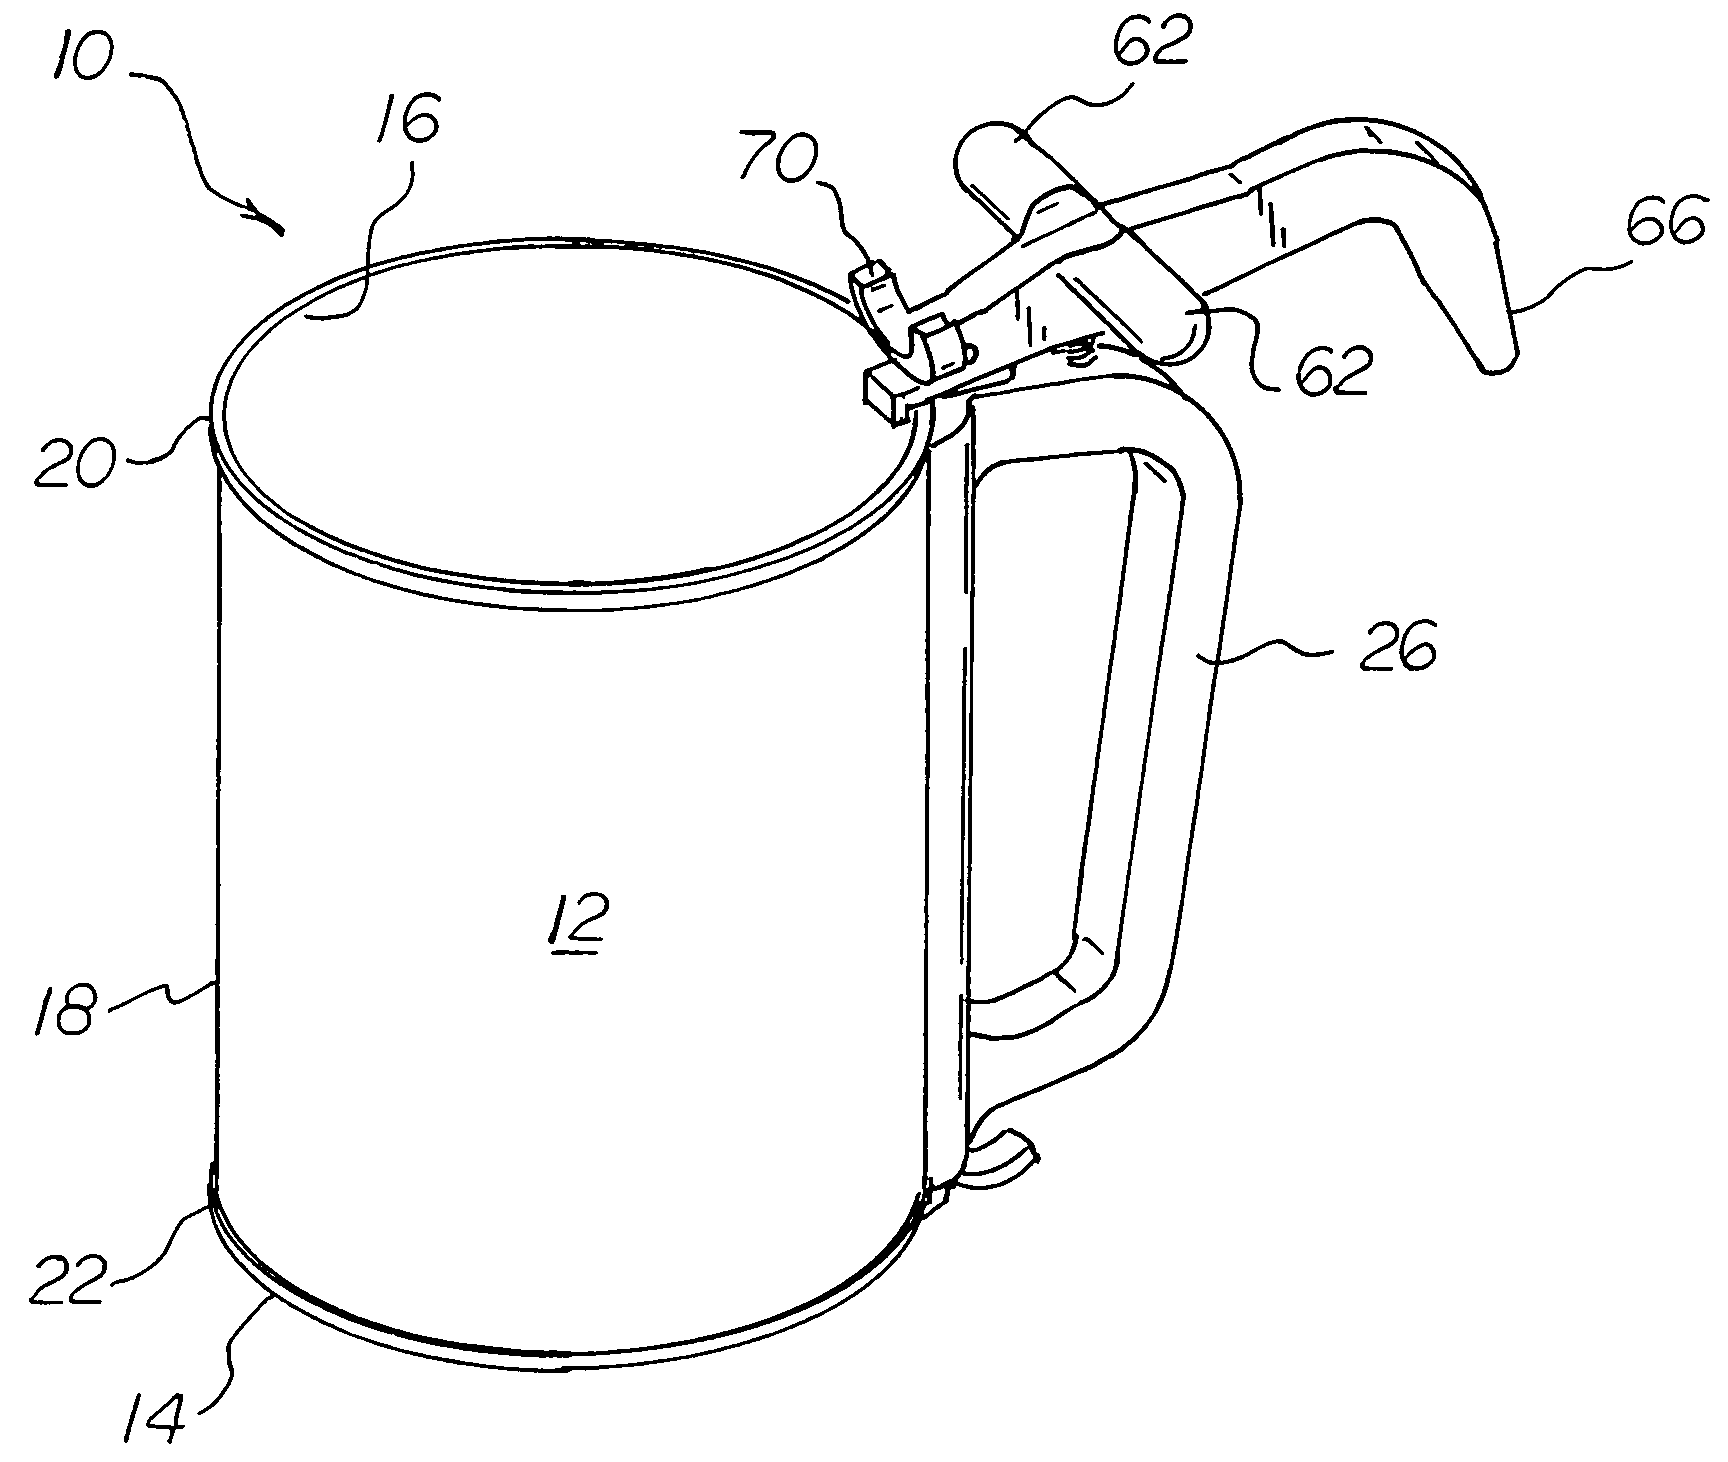 Can holder system